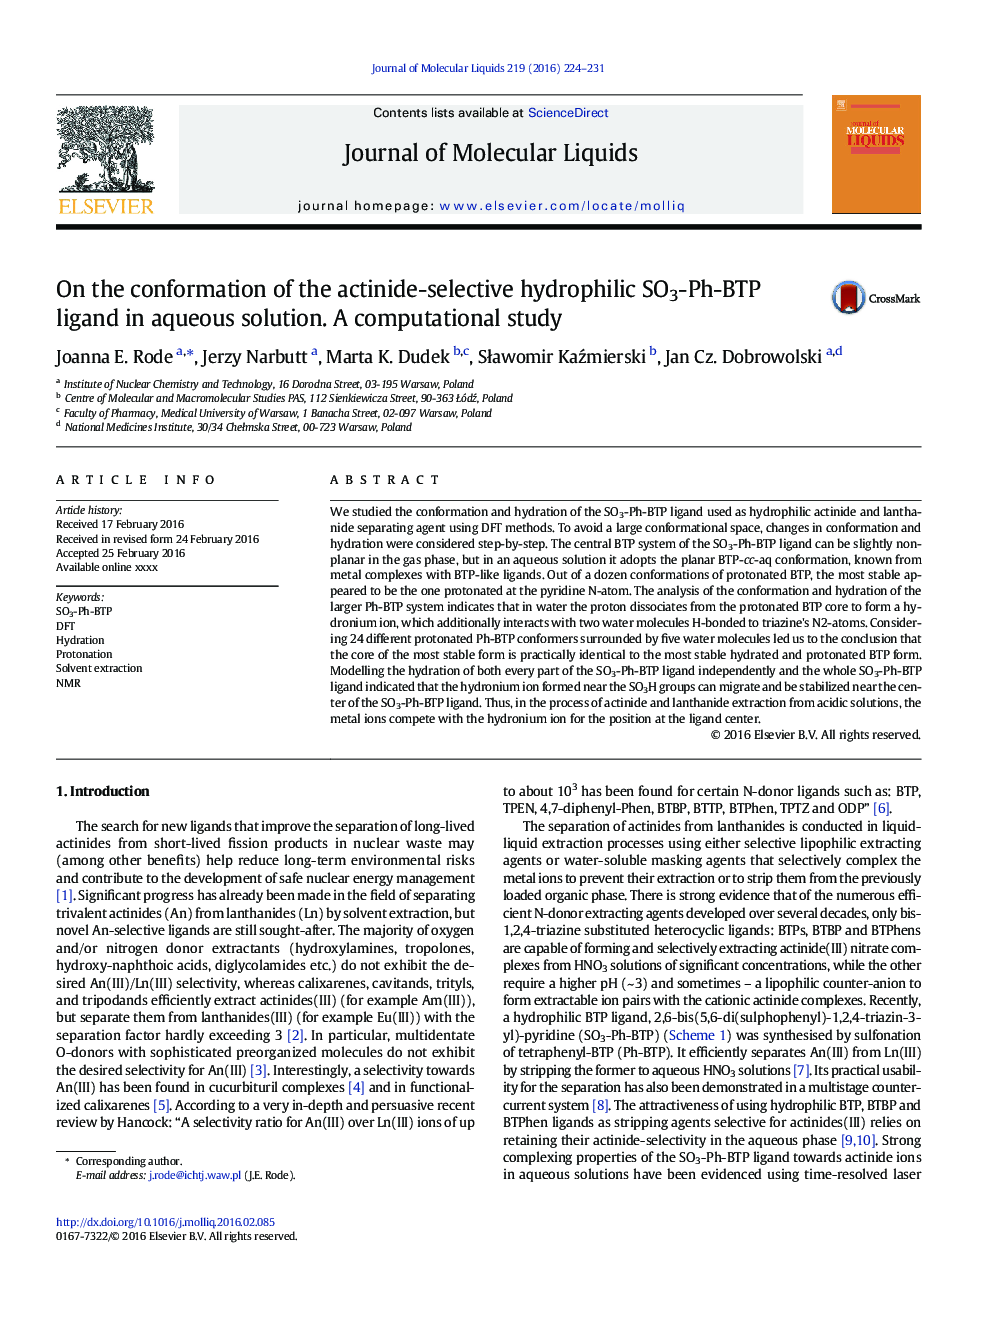 On the conformation of the actinide-selective hydrophilic SO3-Ph-BTP ligand in aqueous solution. A computational study